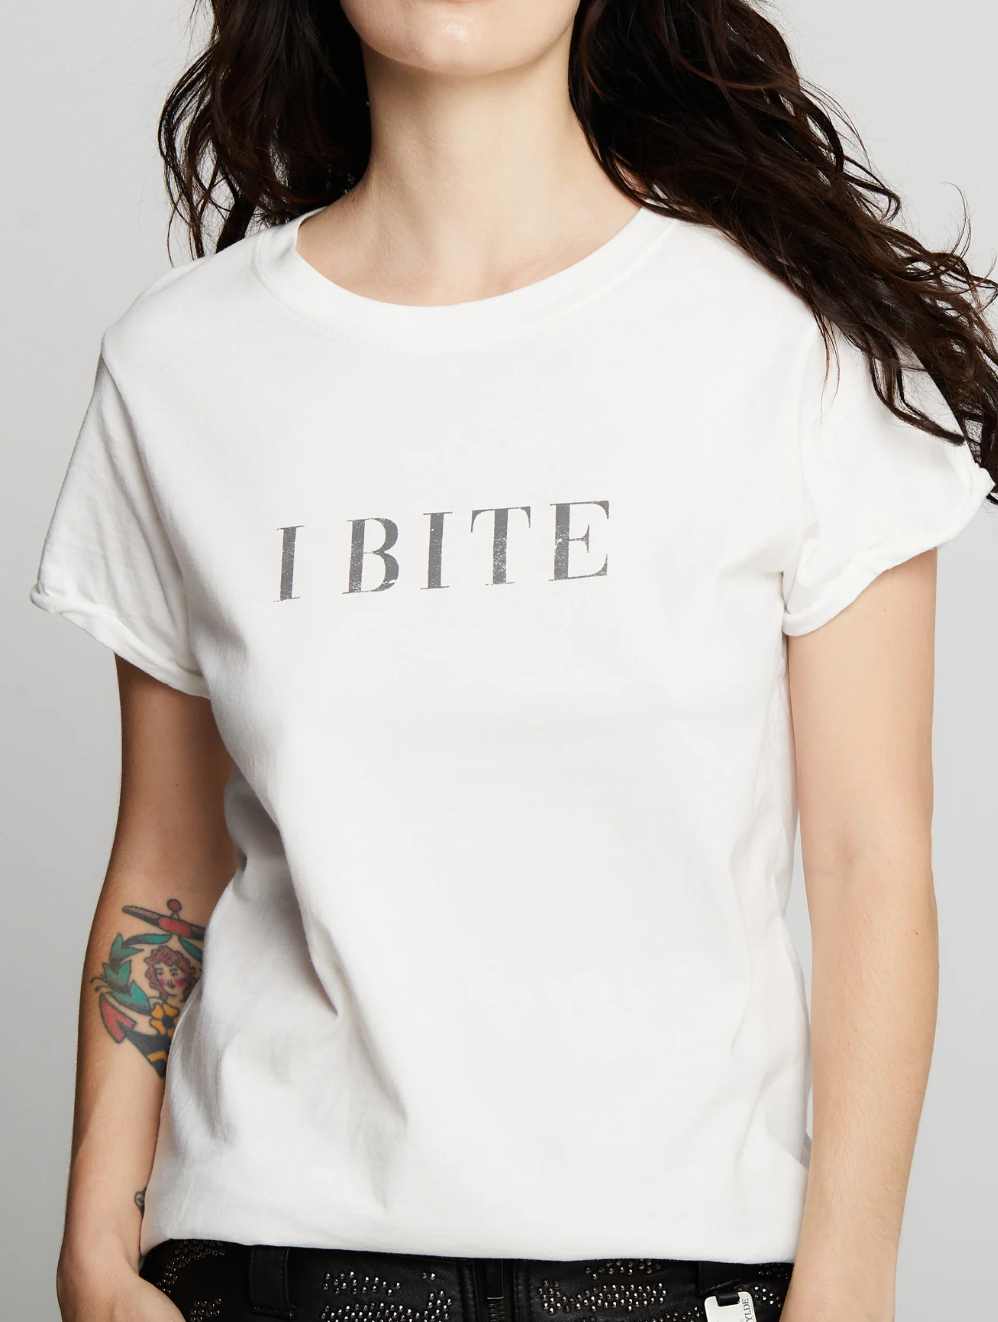 I Bite White Fitted Tee - Recycled Karma